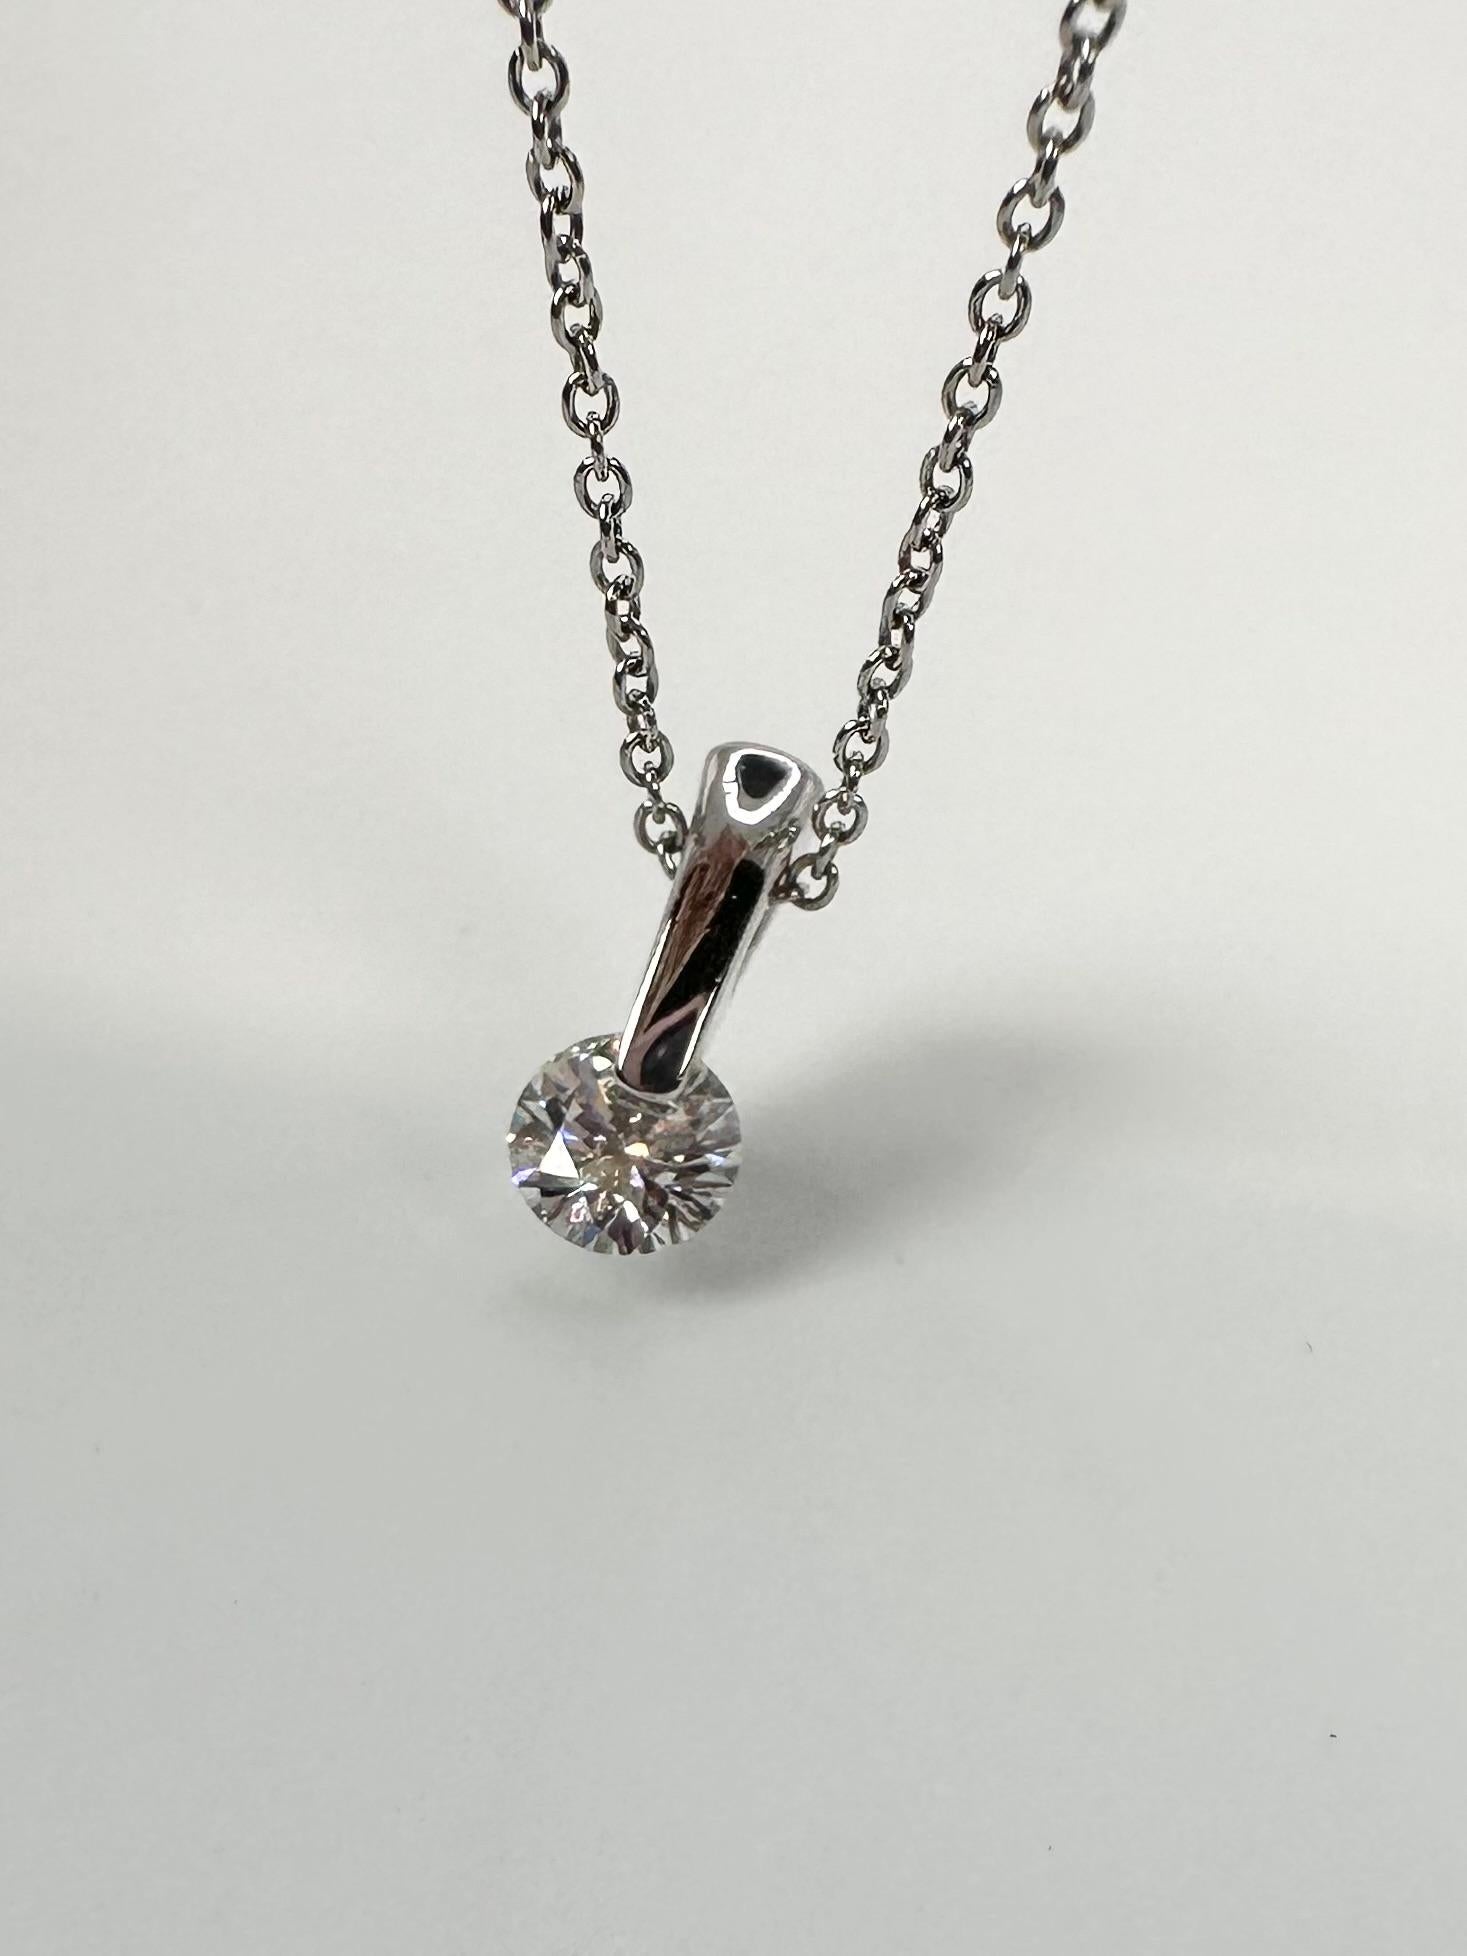 Dainty pendant neklace with solitaire diamond in platinum weighing 0.53ct mounted in a unique setting style.
GRAM WEIGHT: 1.80
METAL:Platinum
NECKLACE-16”
NATURAL DIAMOND(S)
Cut: Round Brilliant
Color: G
Clarity: VS2
Carat: 0.53ct
Item #: